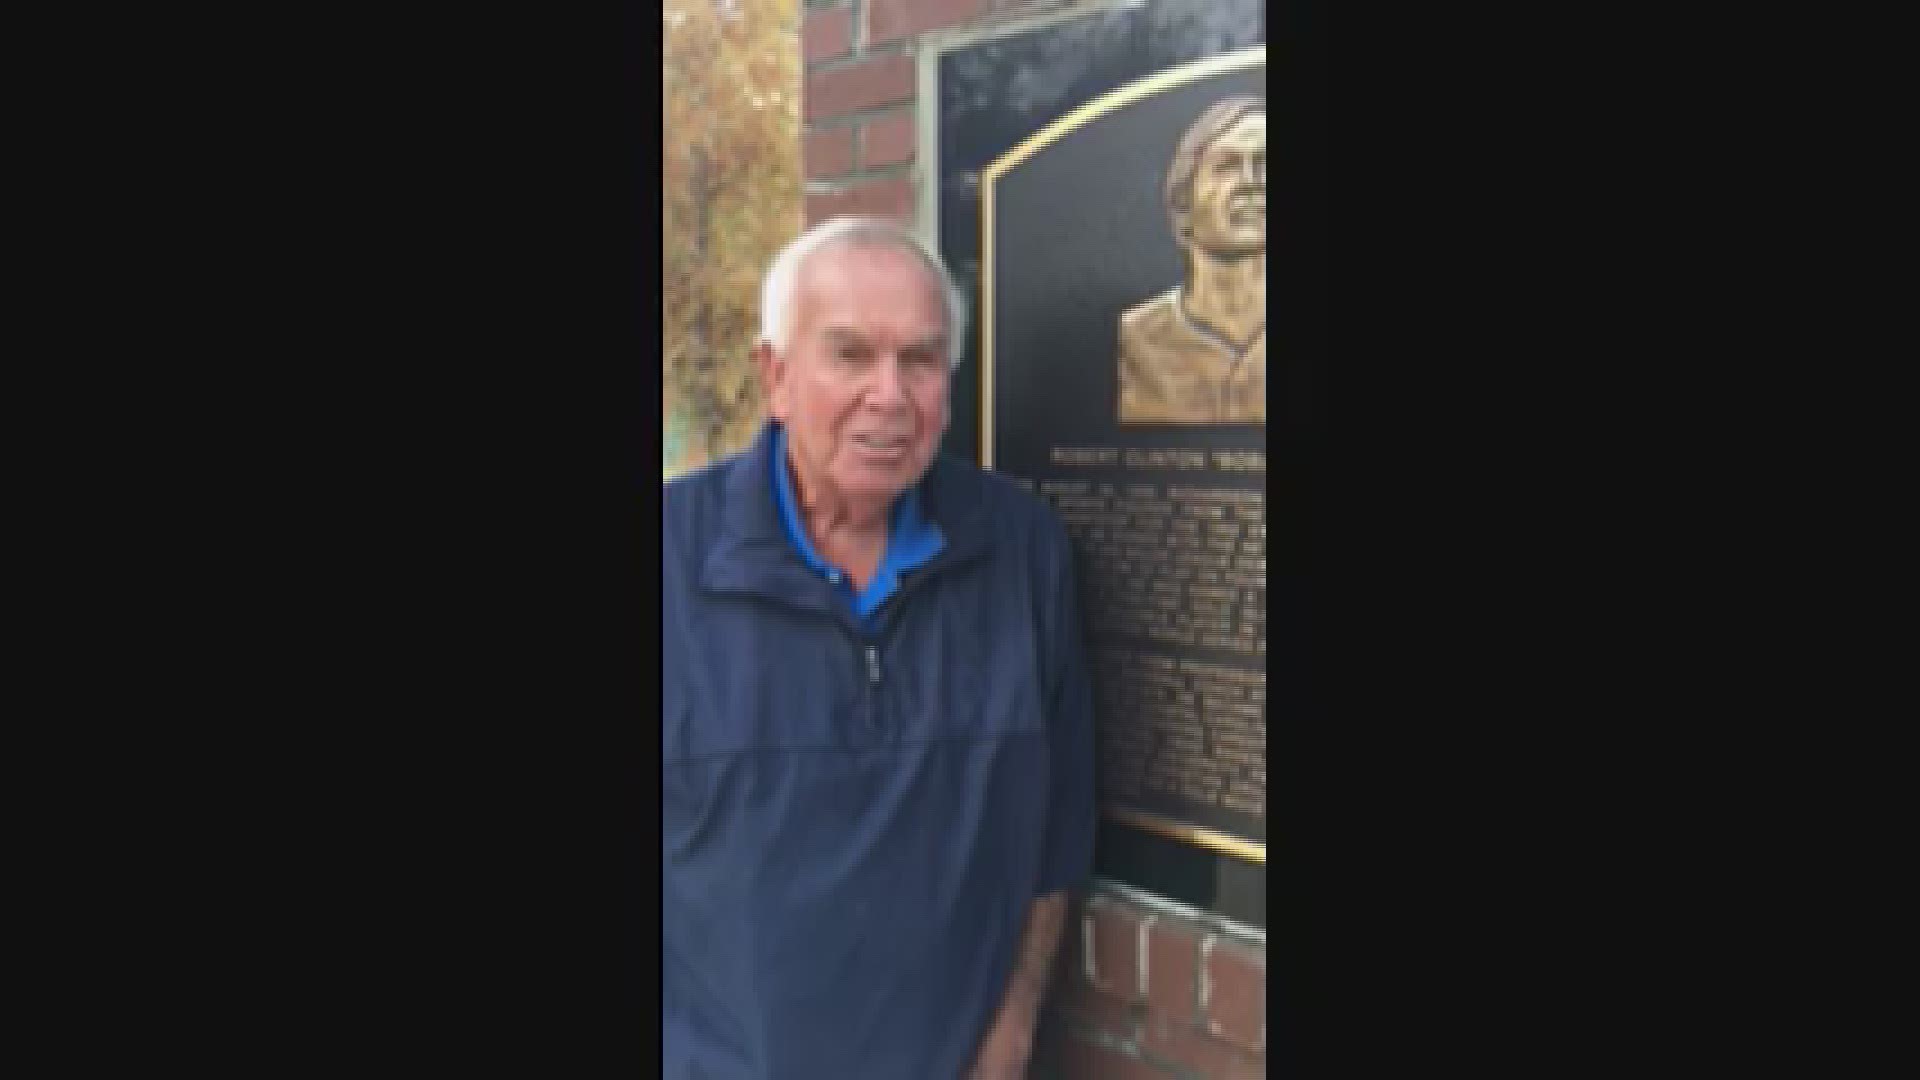 South Carolina athletic legend Bobby Richardson has a few road rules for young athletes.